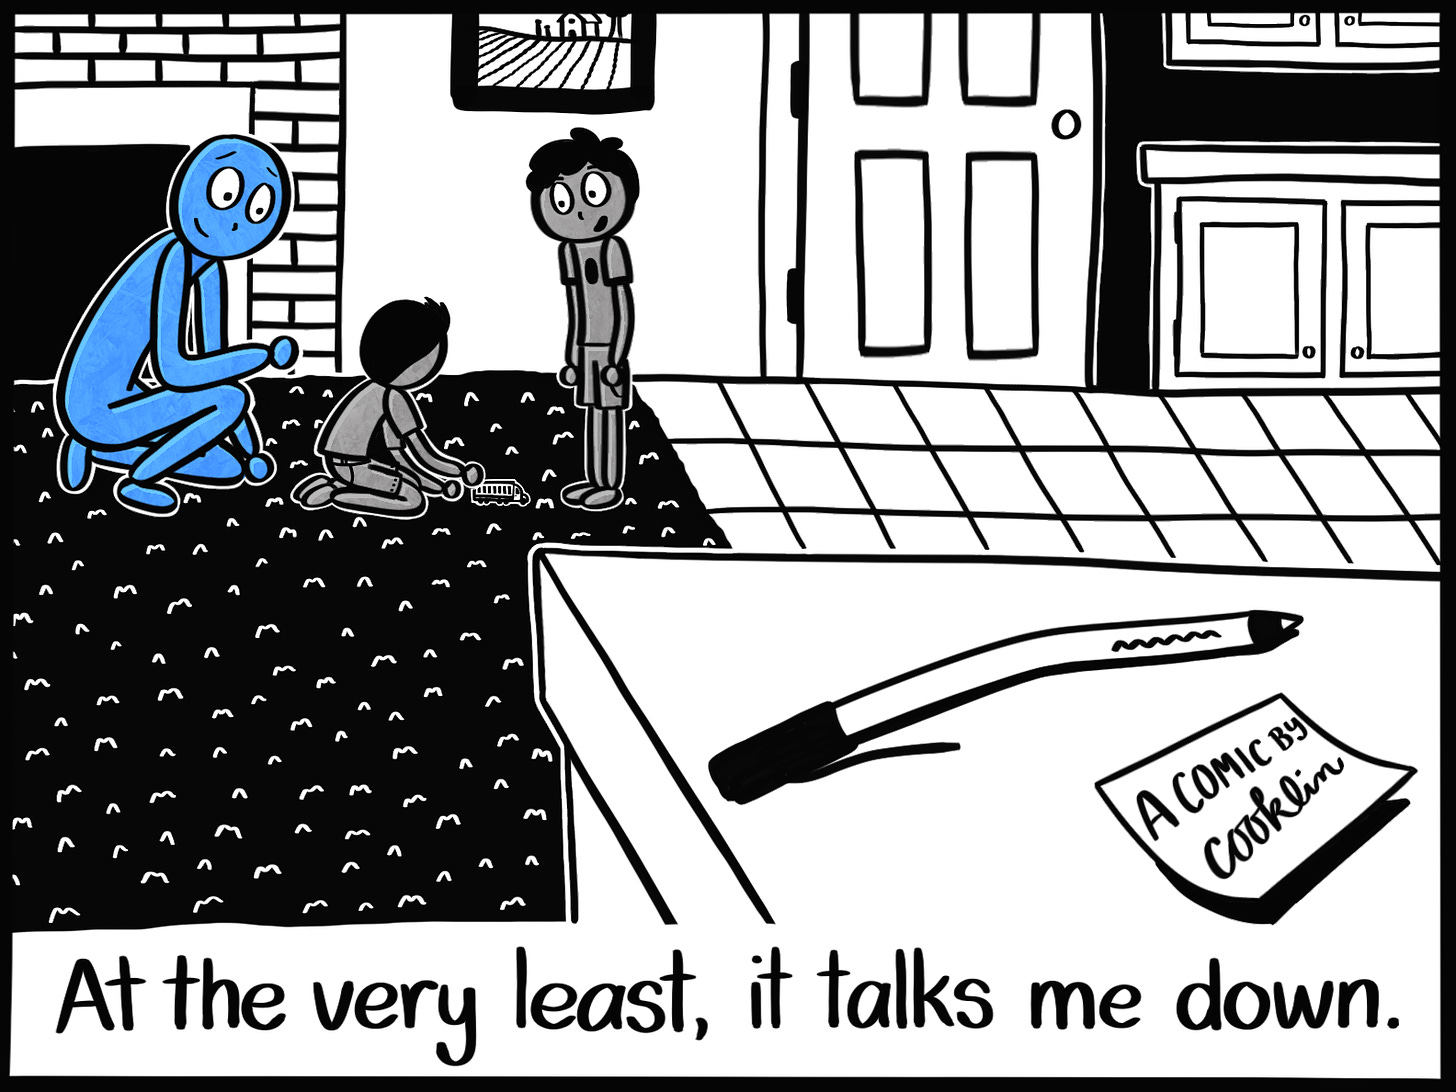 Caption: At the very least, it talks me down. Image: In the background, the Blue Person is kneeling next to their kids with a smile on their face, watching them play. In the foreground, the pen is lying on the counter next to a sticky note that reads, "A comic by cooklin."